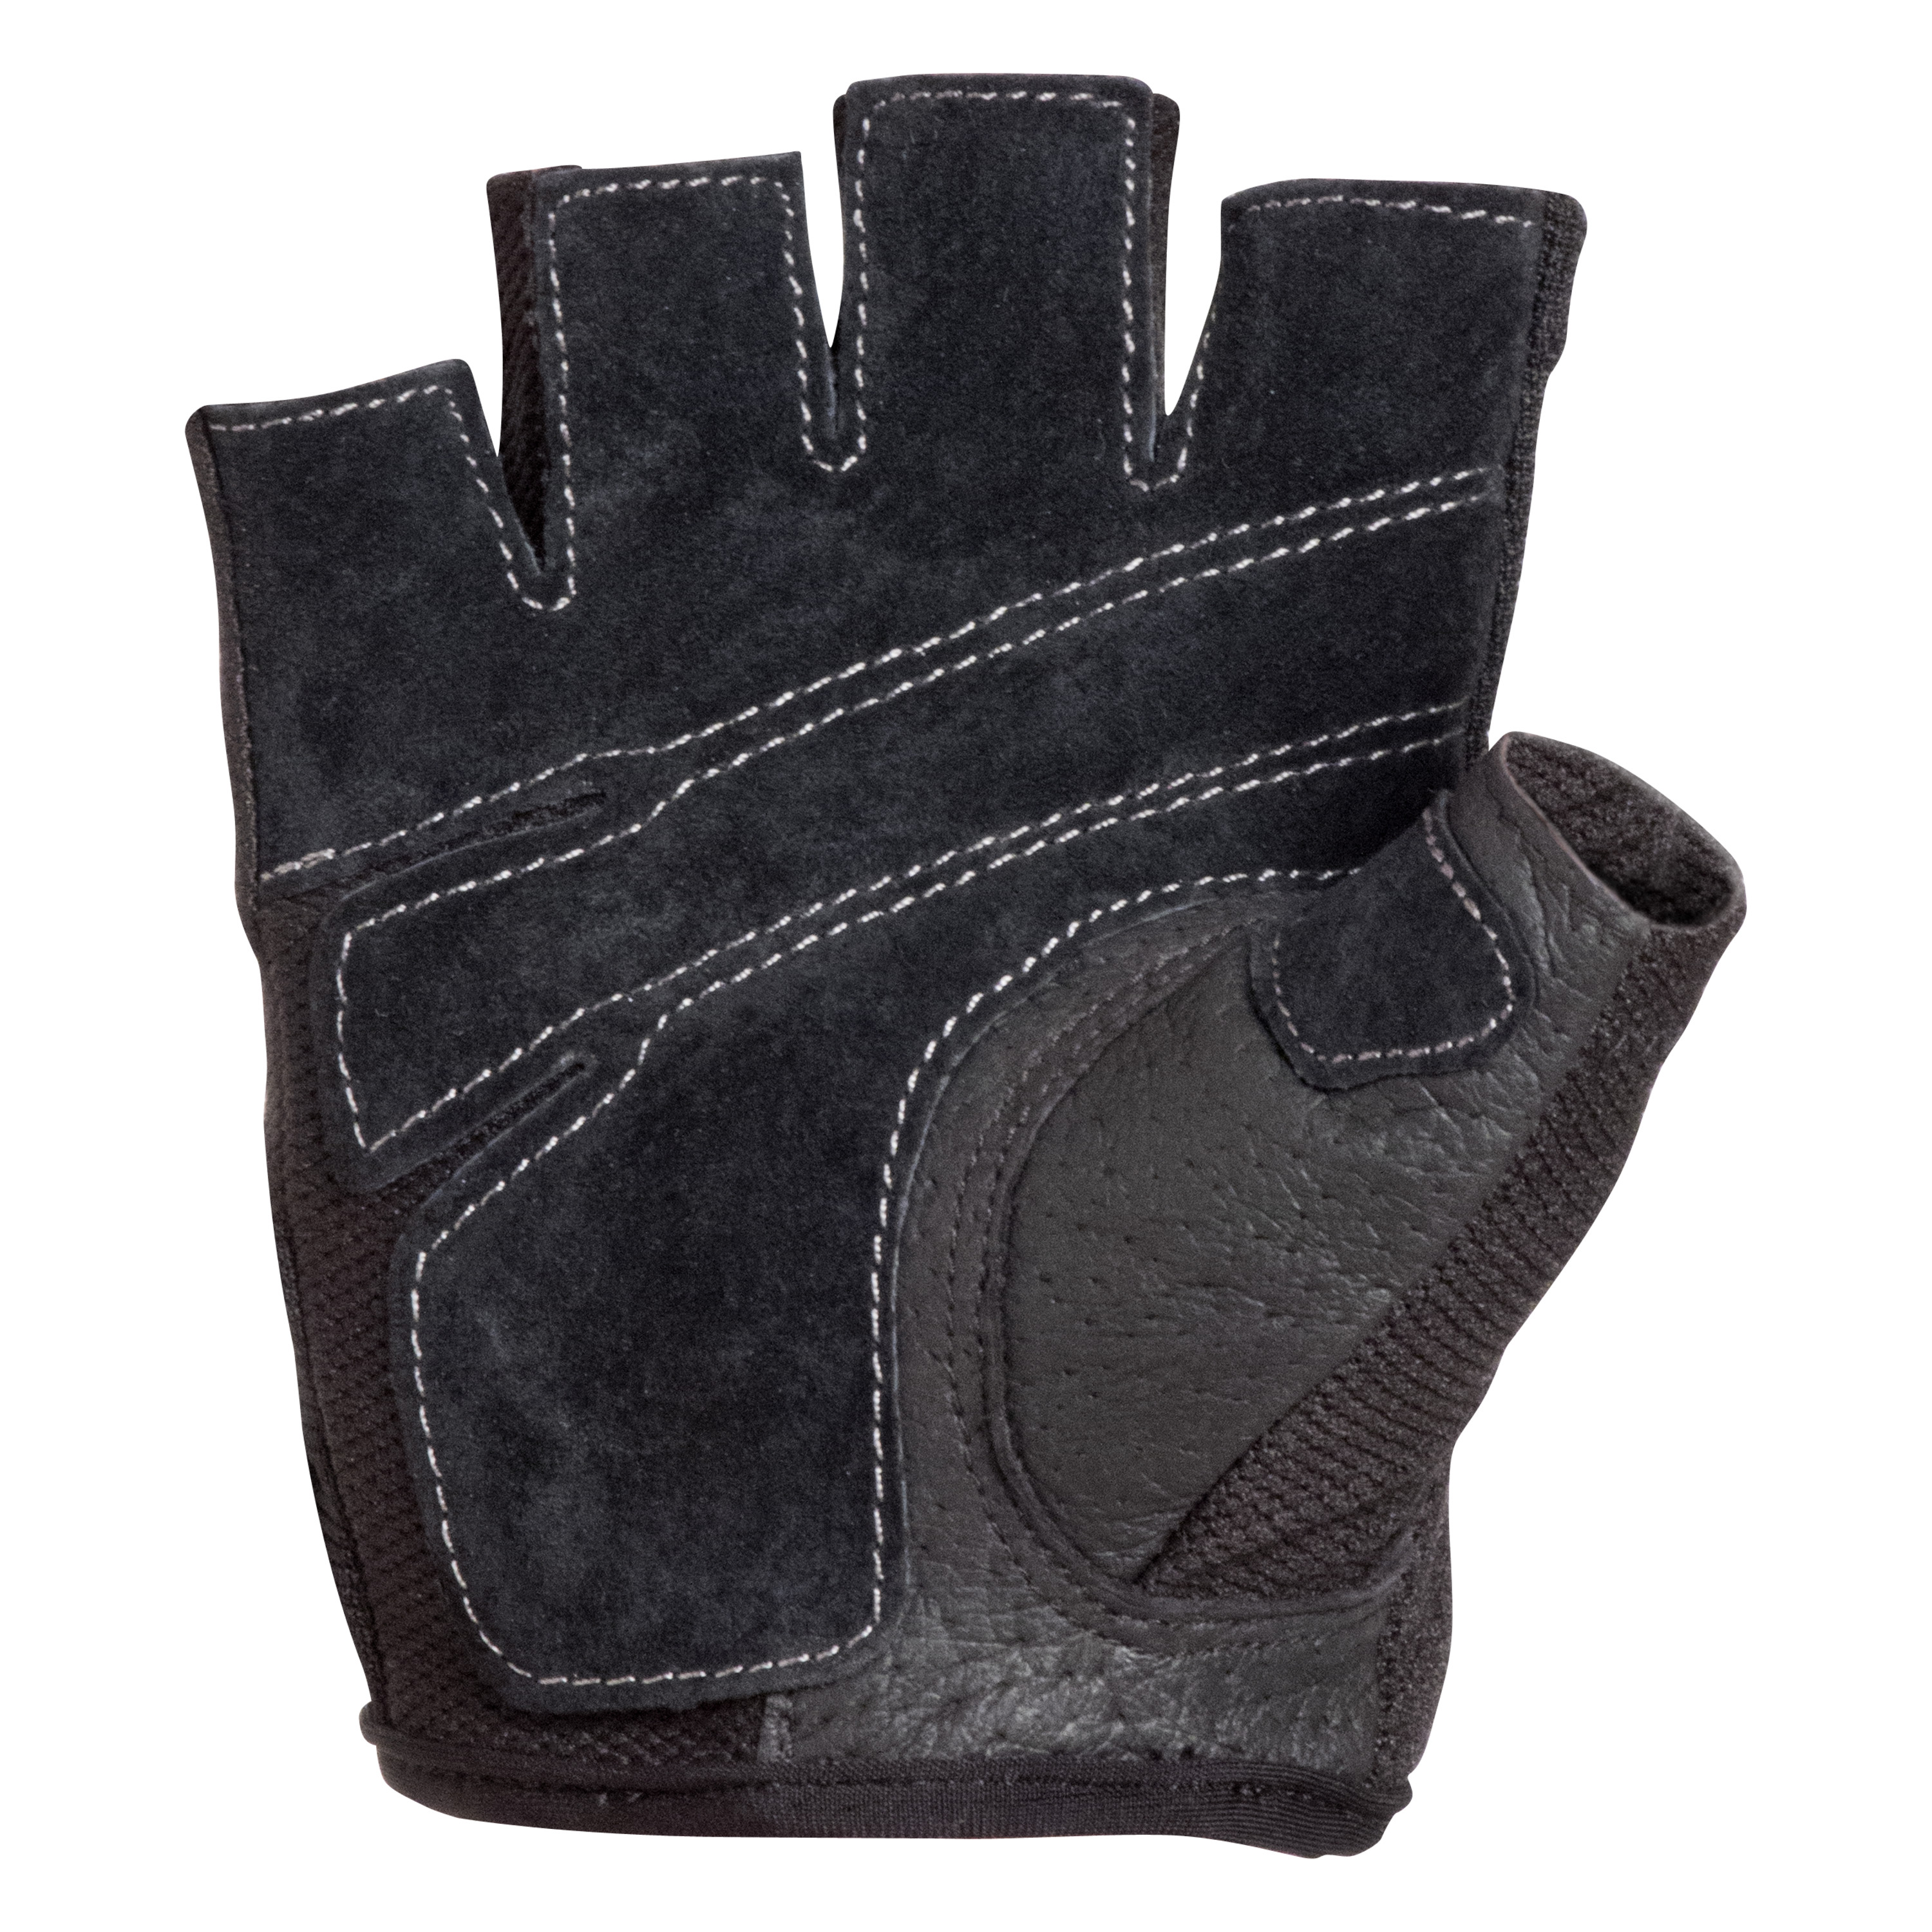 Harbinger Women's Power Weightlifting Gloves with StretchBack Mesh and Leather Palm (Pair) (2017 Model), Small - image 3 of 3